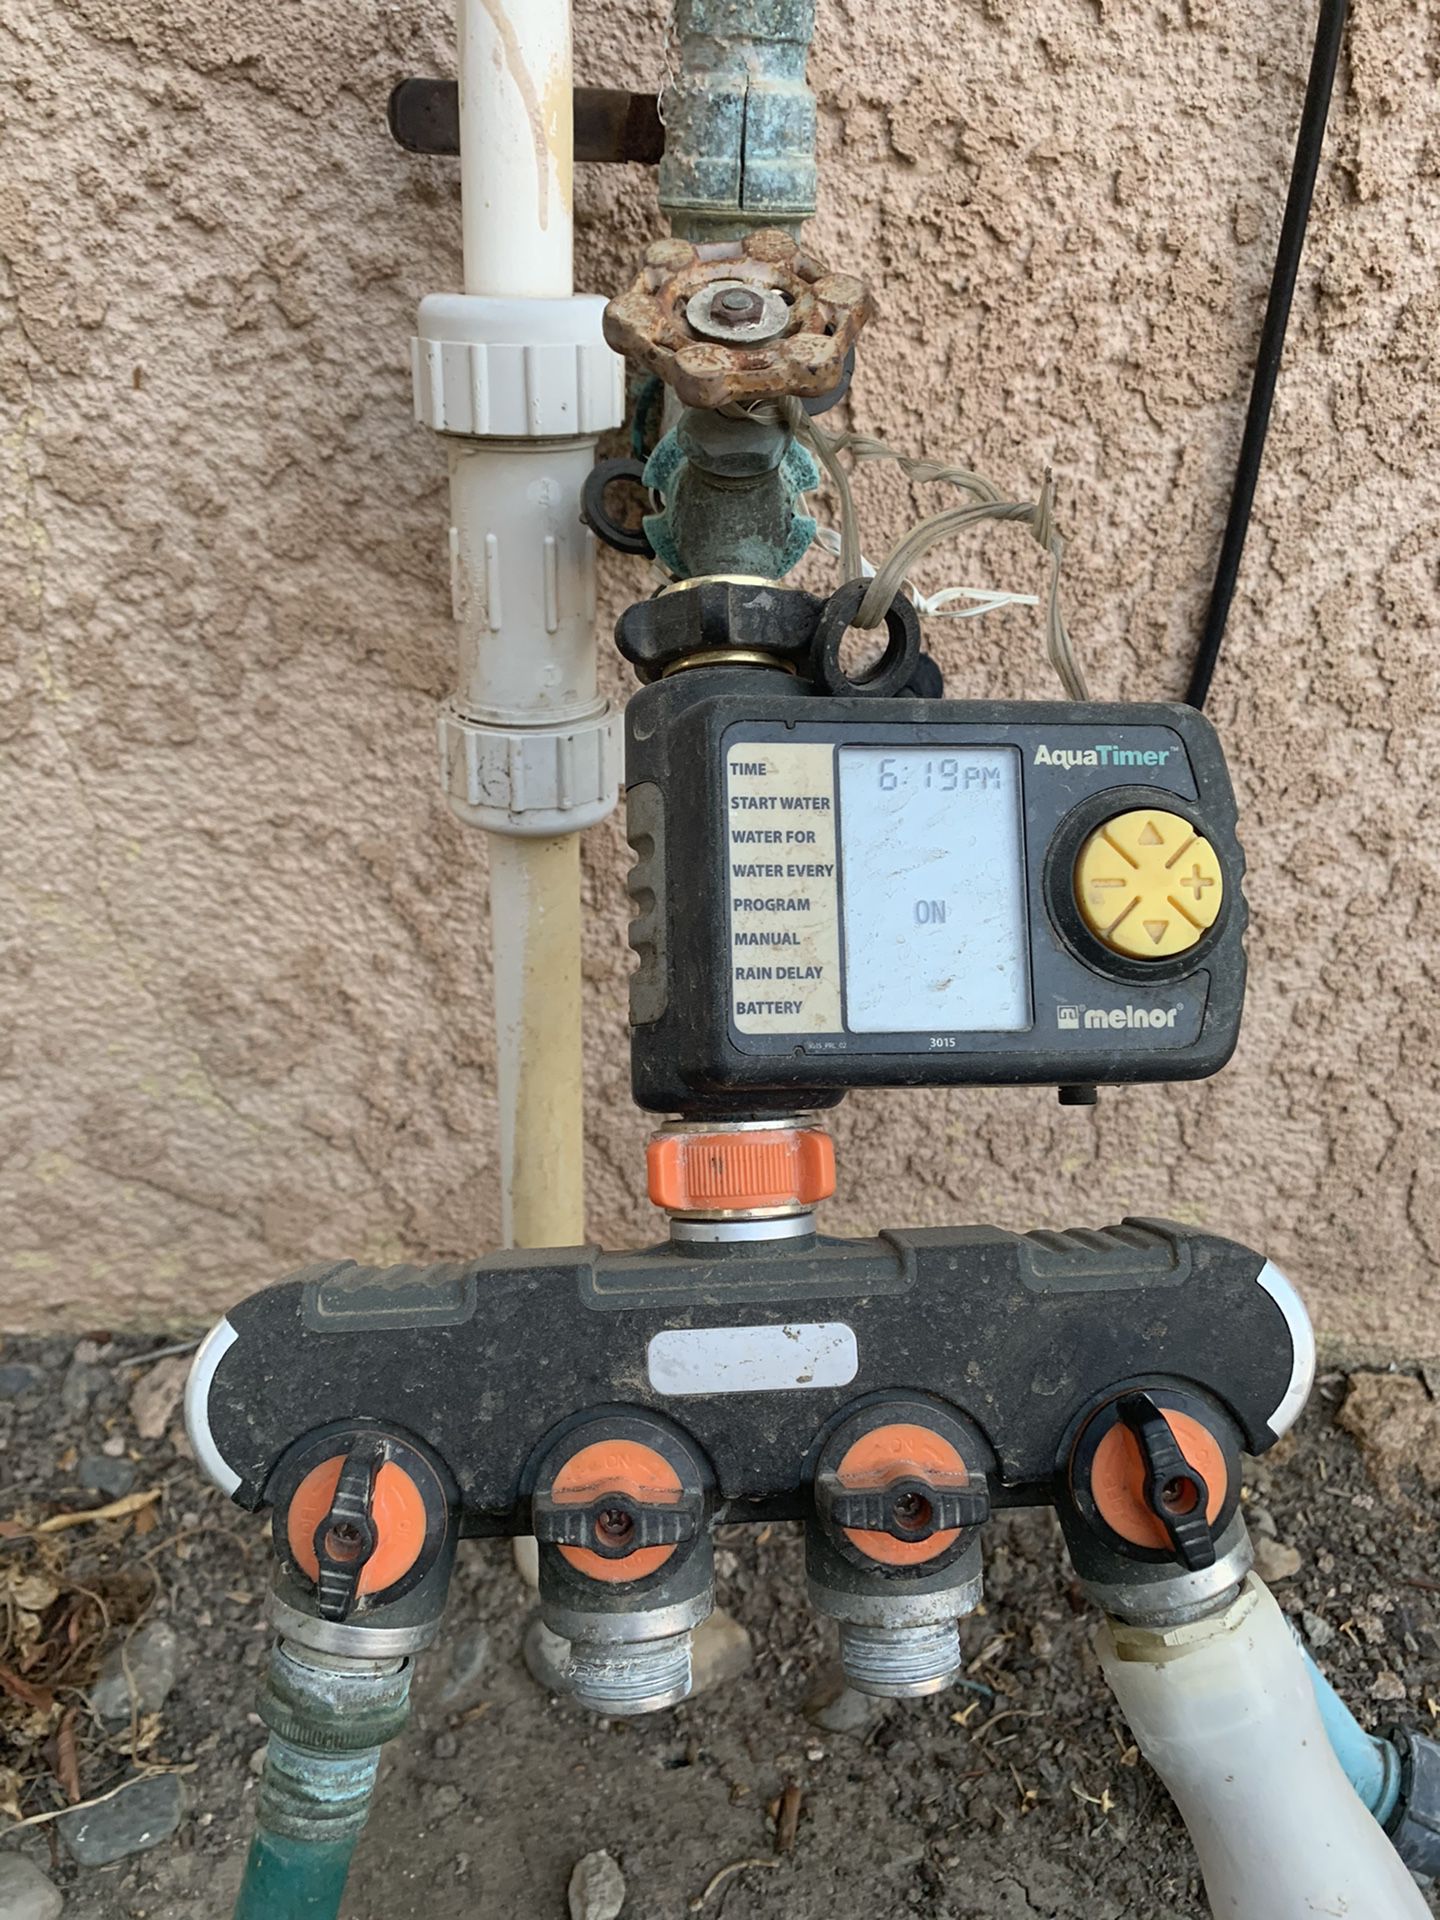 Water timer and hose splitter